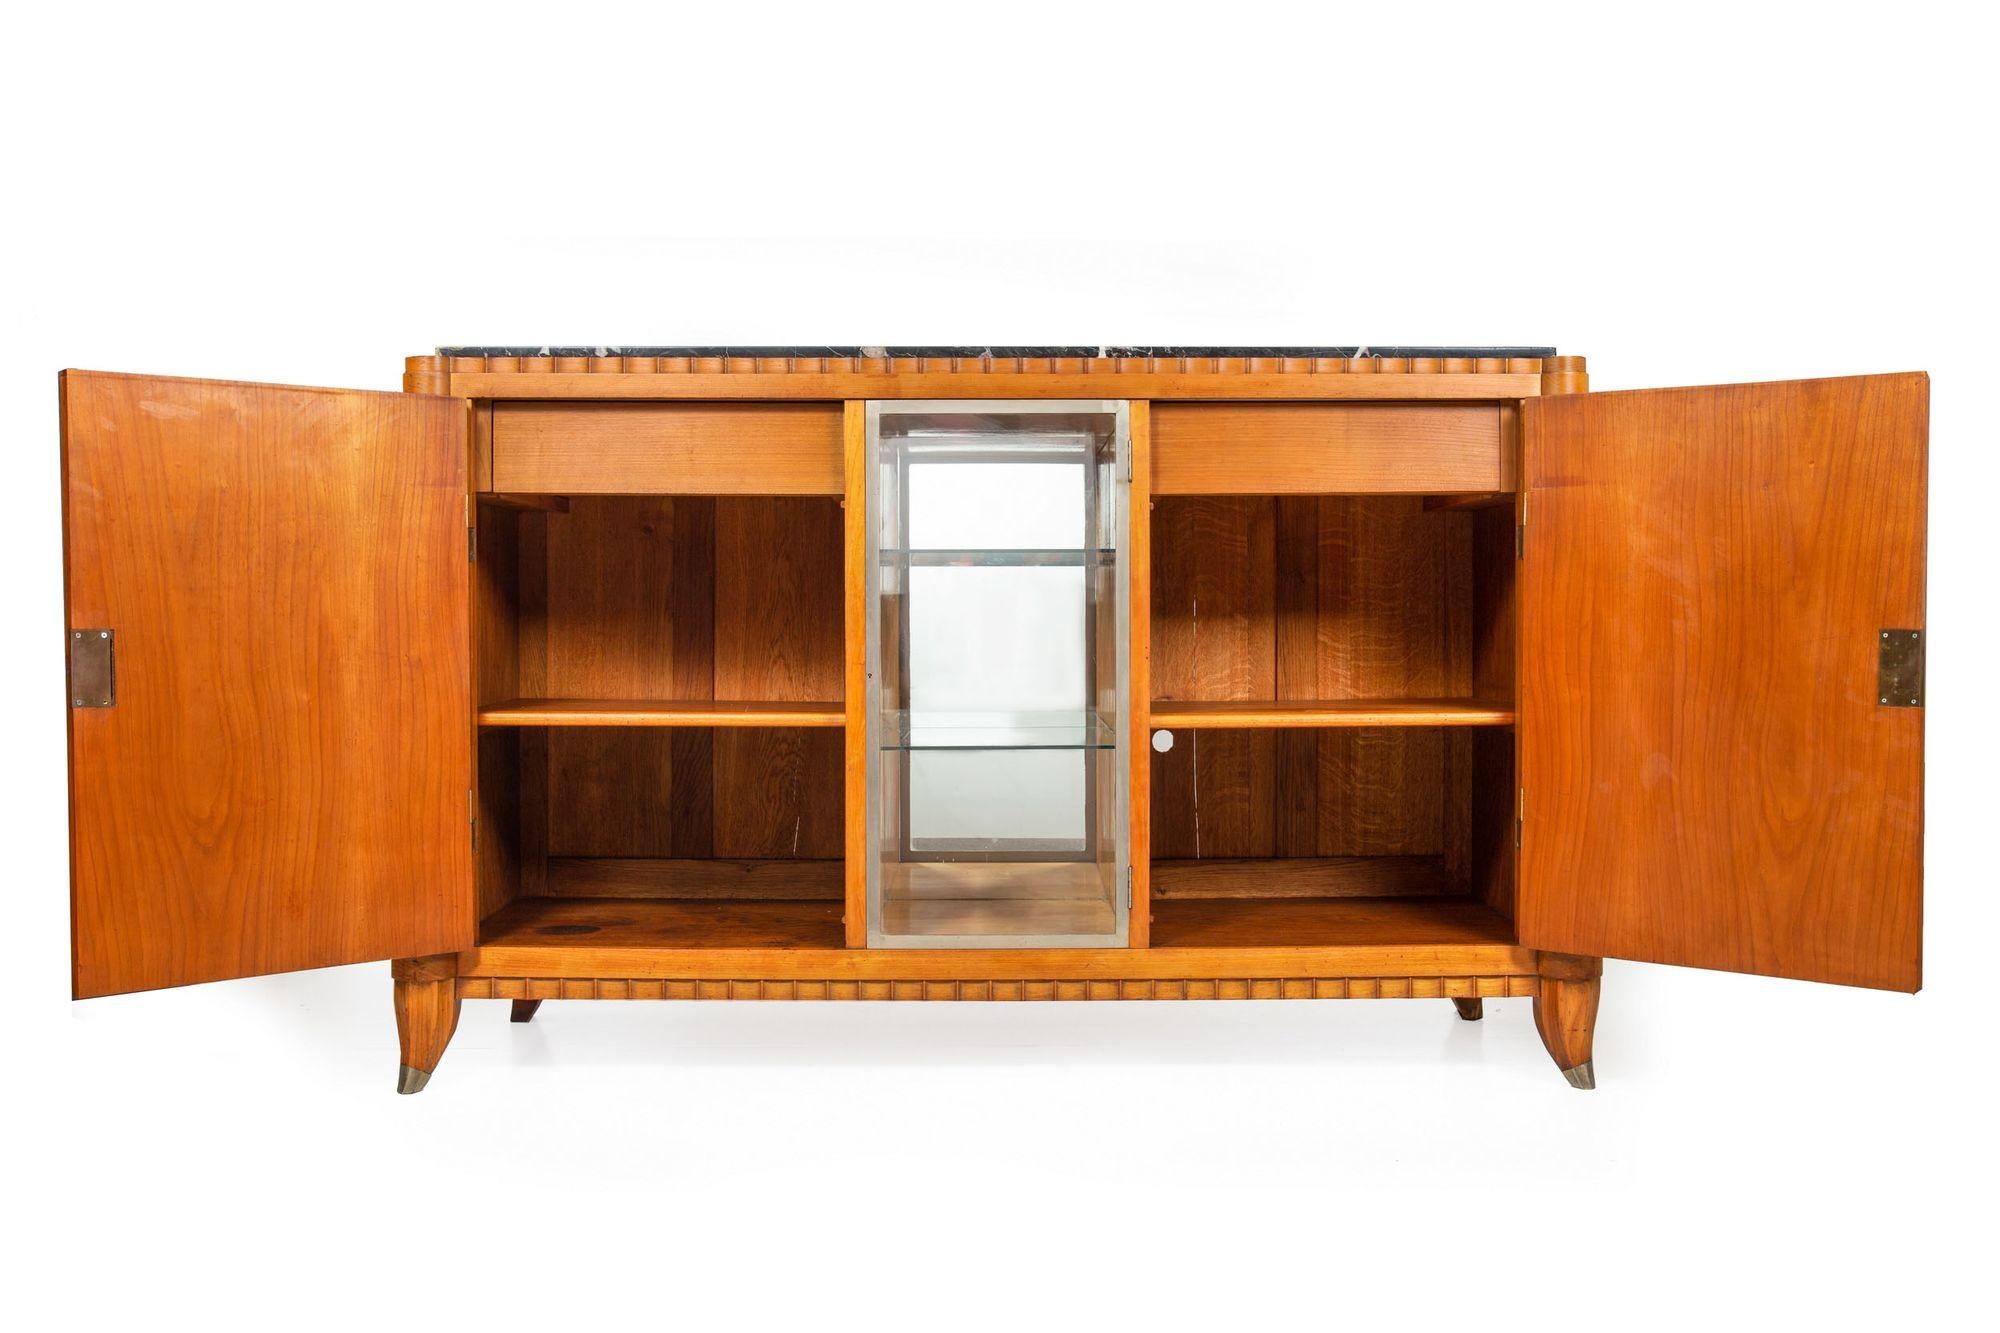 ART DECO CHERRYWOOD, NICKEL, GLASS AND MARBLE SIDEBOARD
France, circa first quarter of the 20th century
Item # 303XDB21A 

A gorgeous and also most functional sideboard from the first quarter of the 20th century, it is executed in solid cherrywood